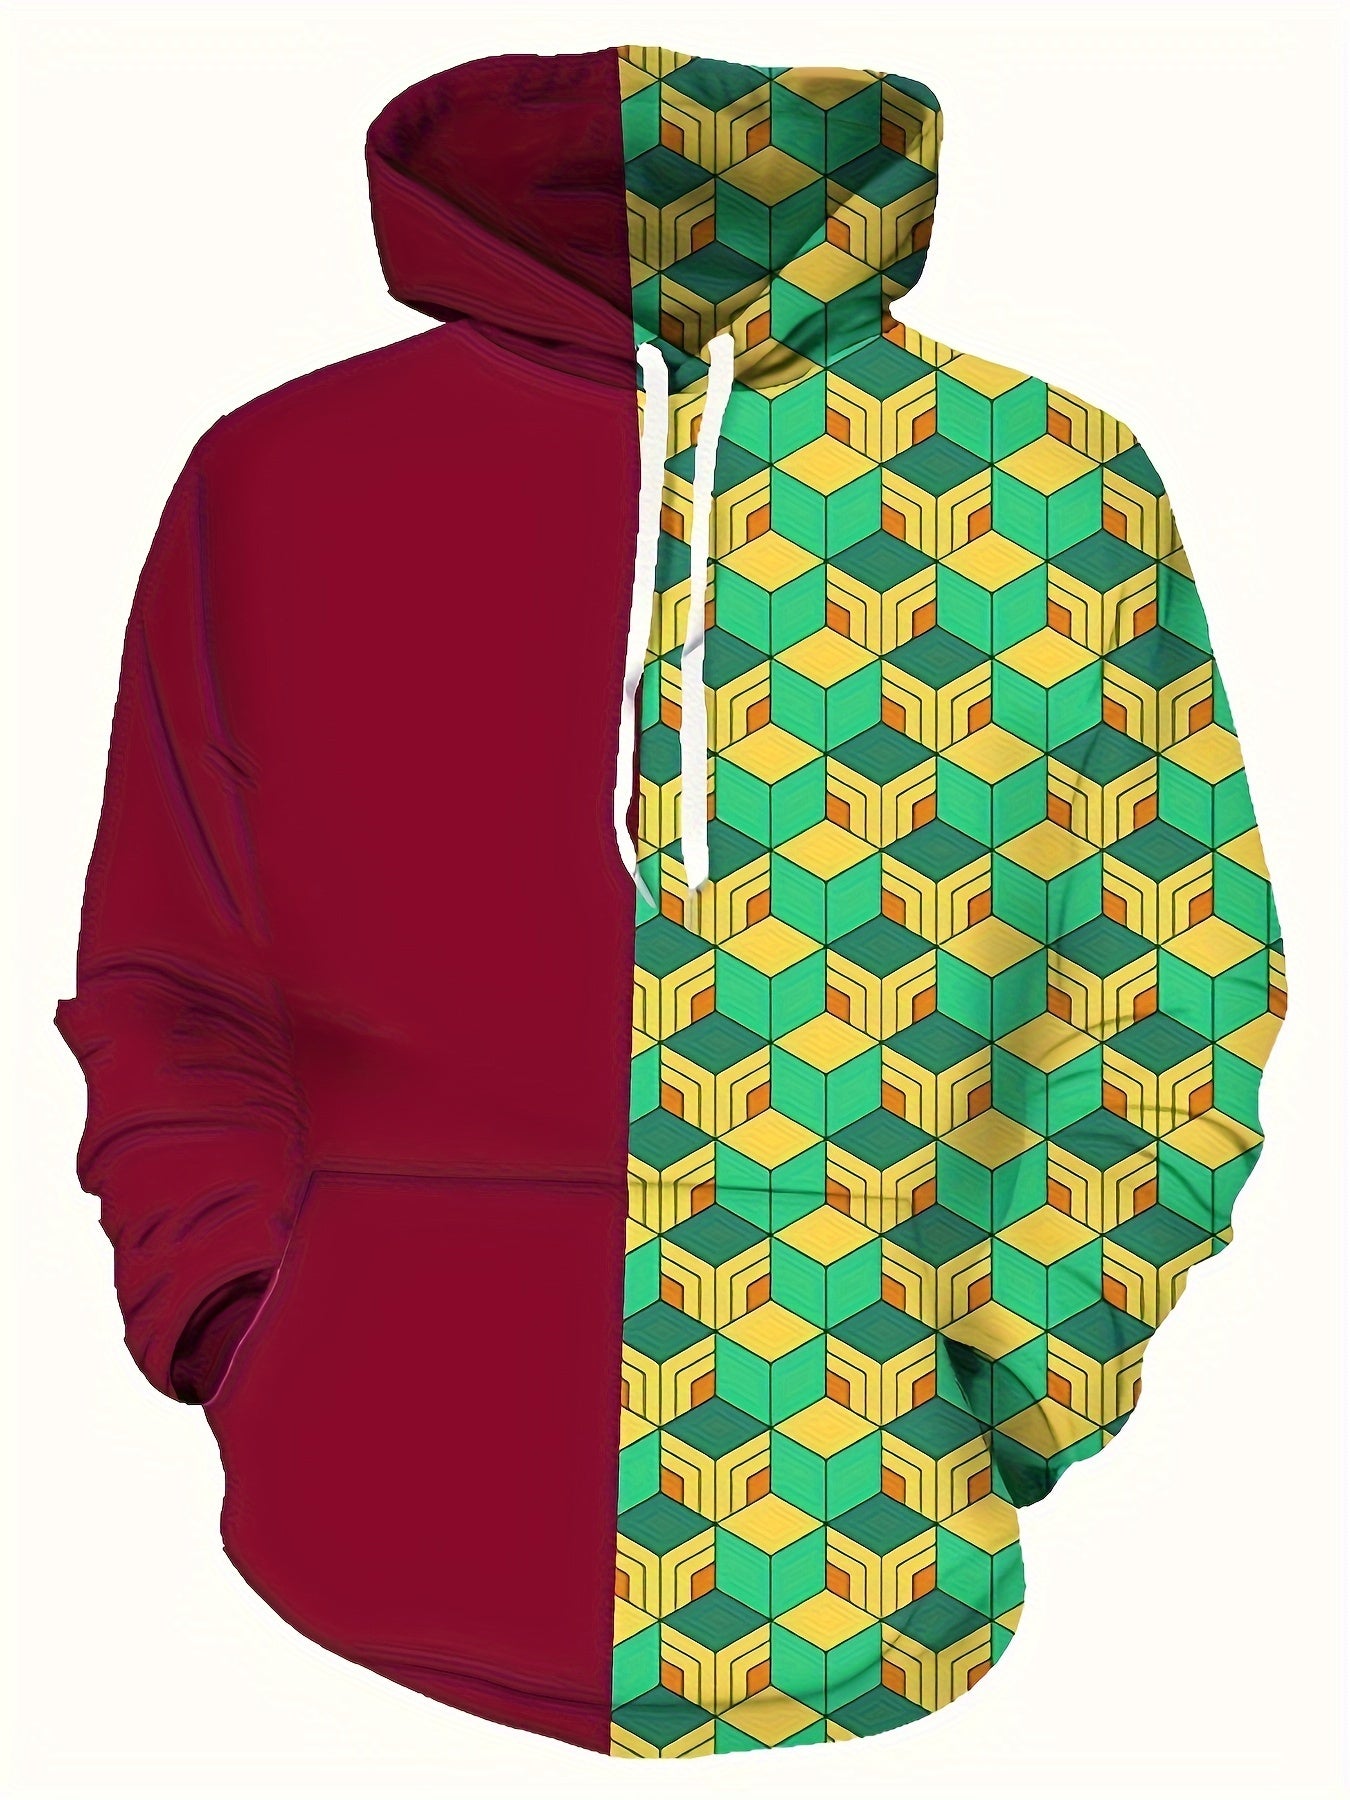 Stylish Anime Printed Hoodie for Men - Winter Fall Casual Comfort with Bold Graphic Design, Perfect Gift for Streetwear Enthusiasts - Rexpect Nerd